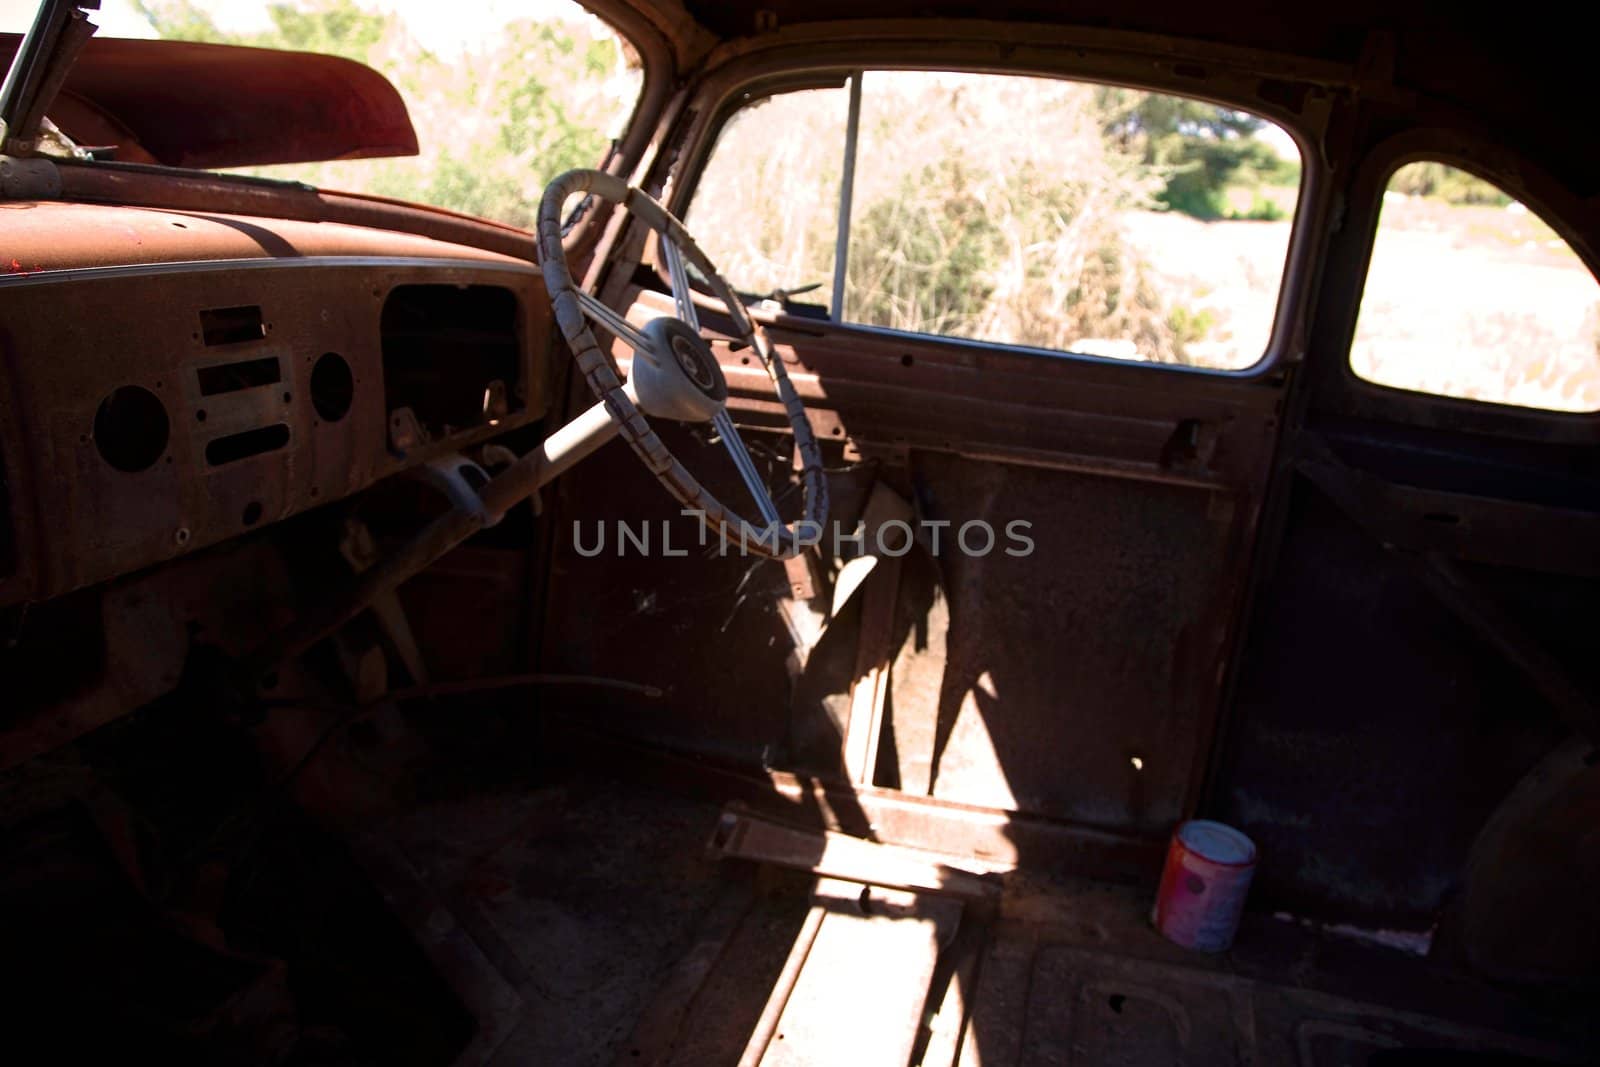 Inside of an old car somwhere in Namibia